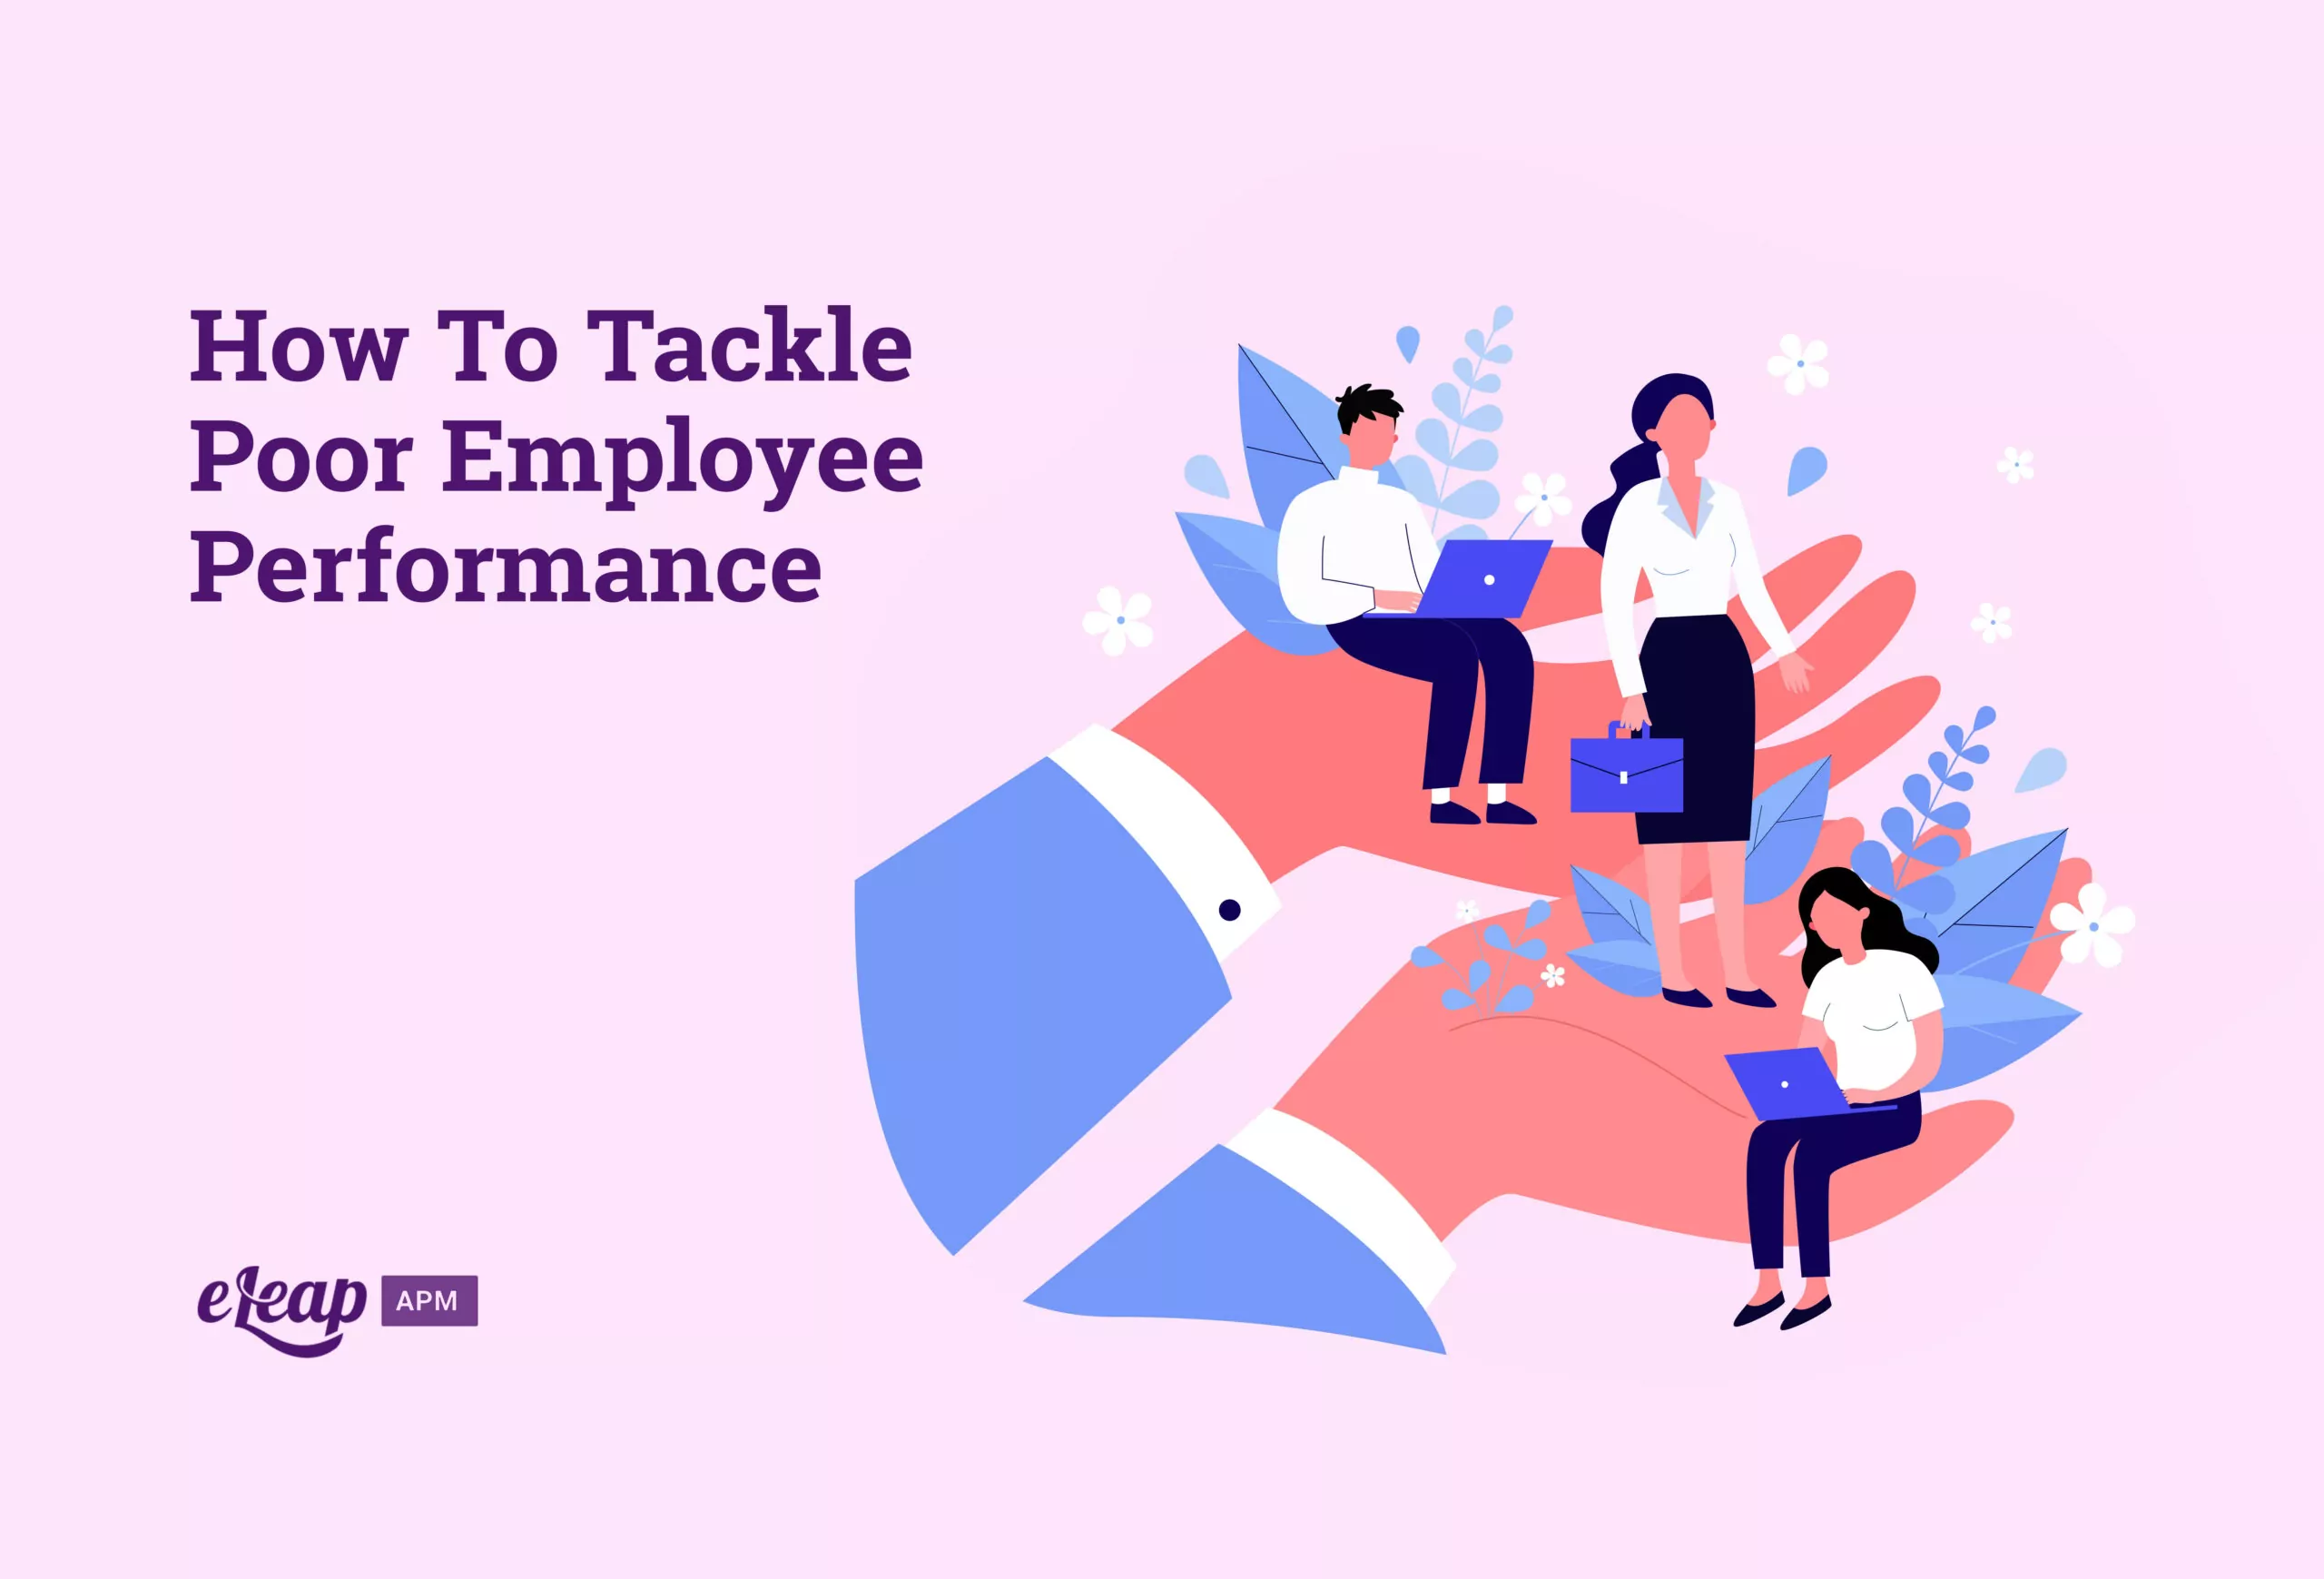 How To Tackle Poor Employee Performance